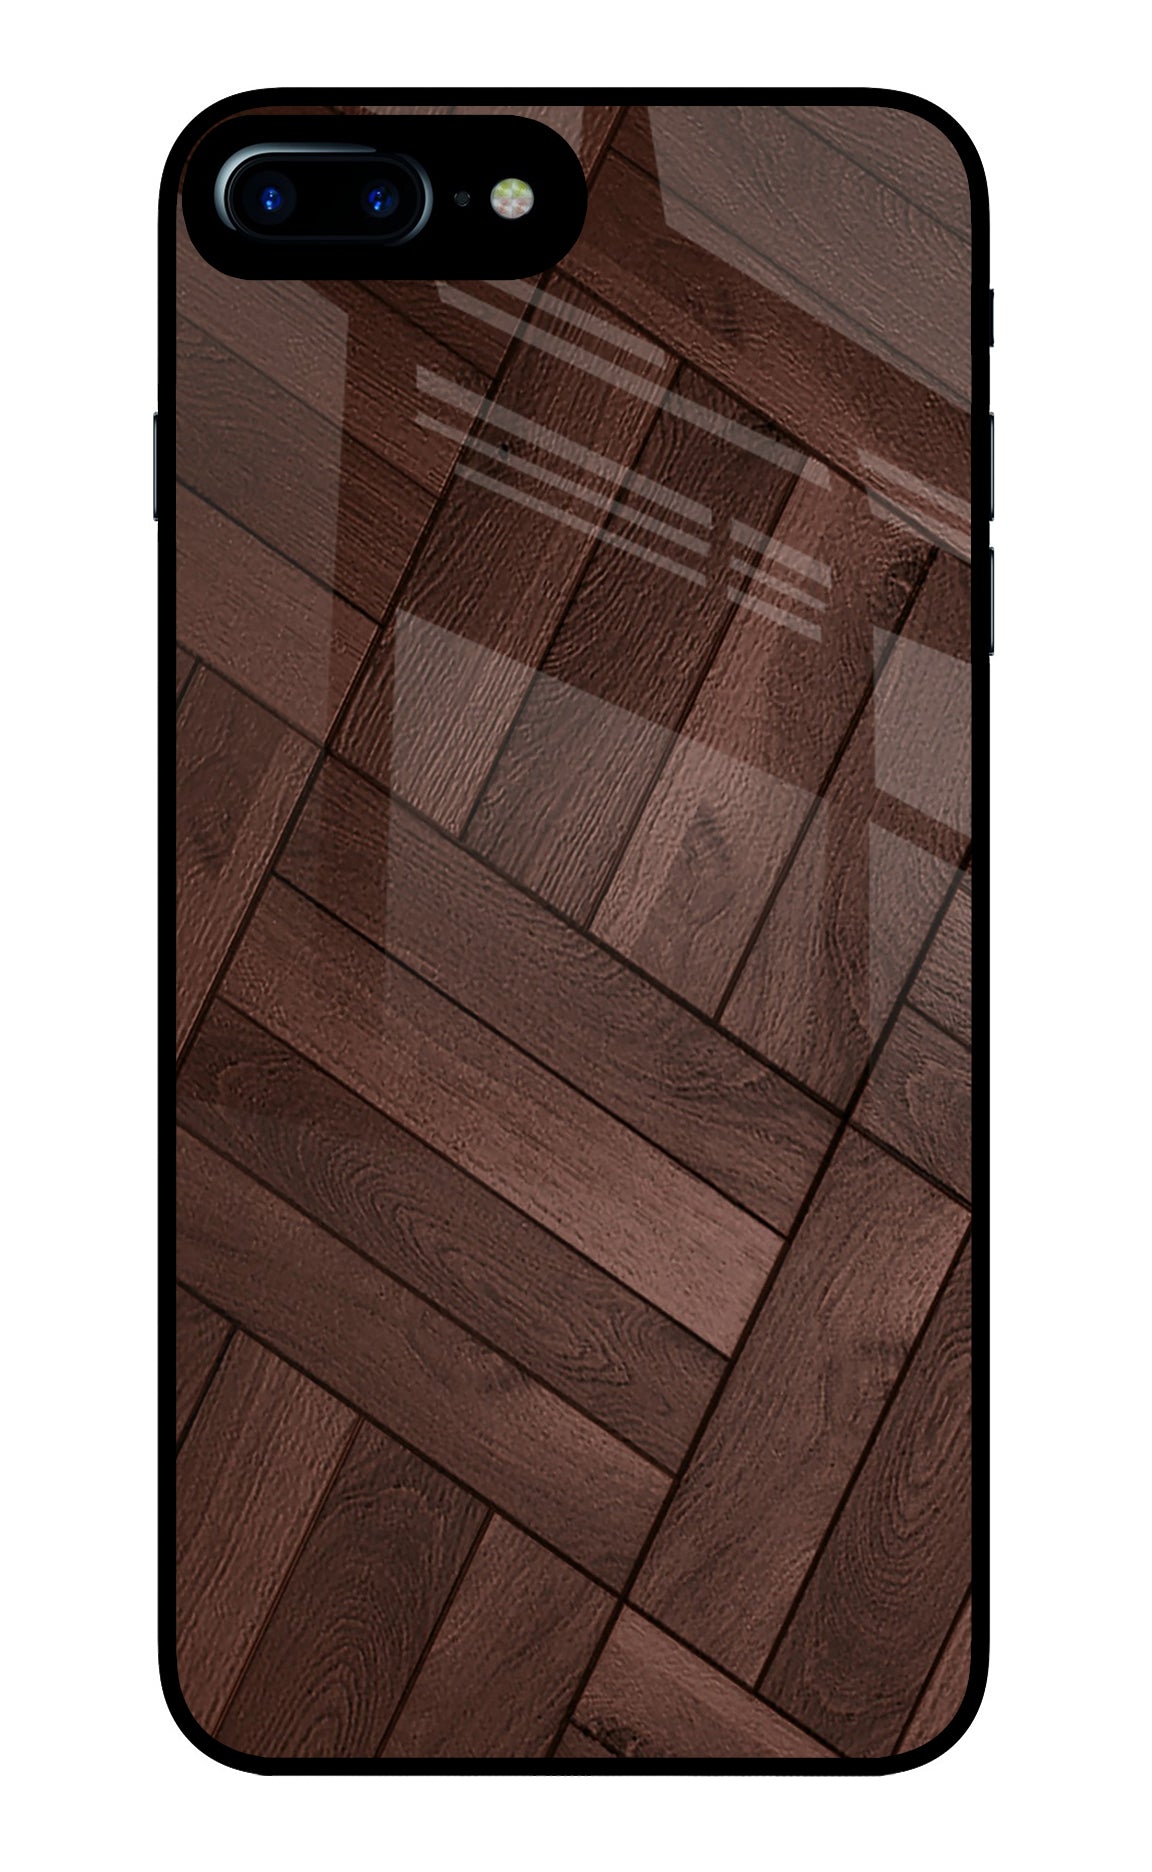 Wooden Texture Design iPhone 8 Plus Back Cover